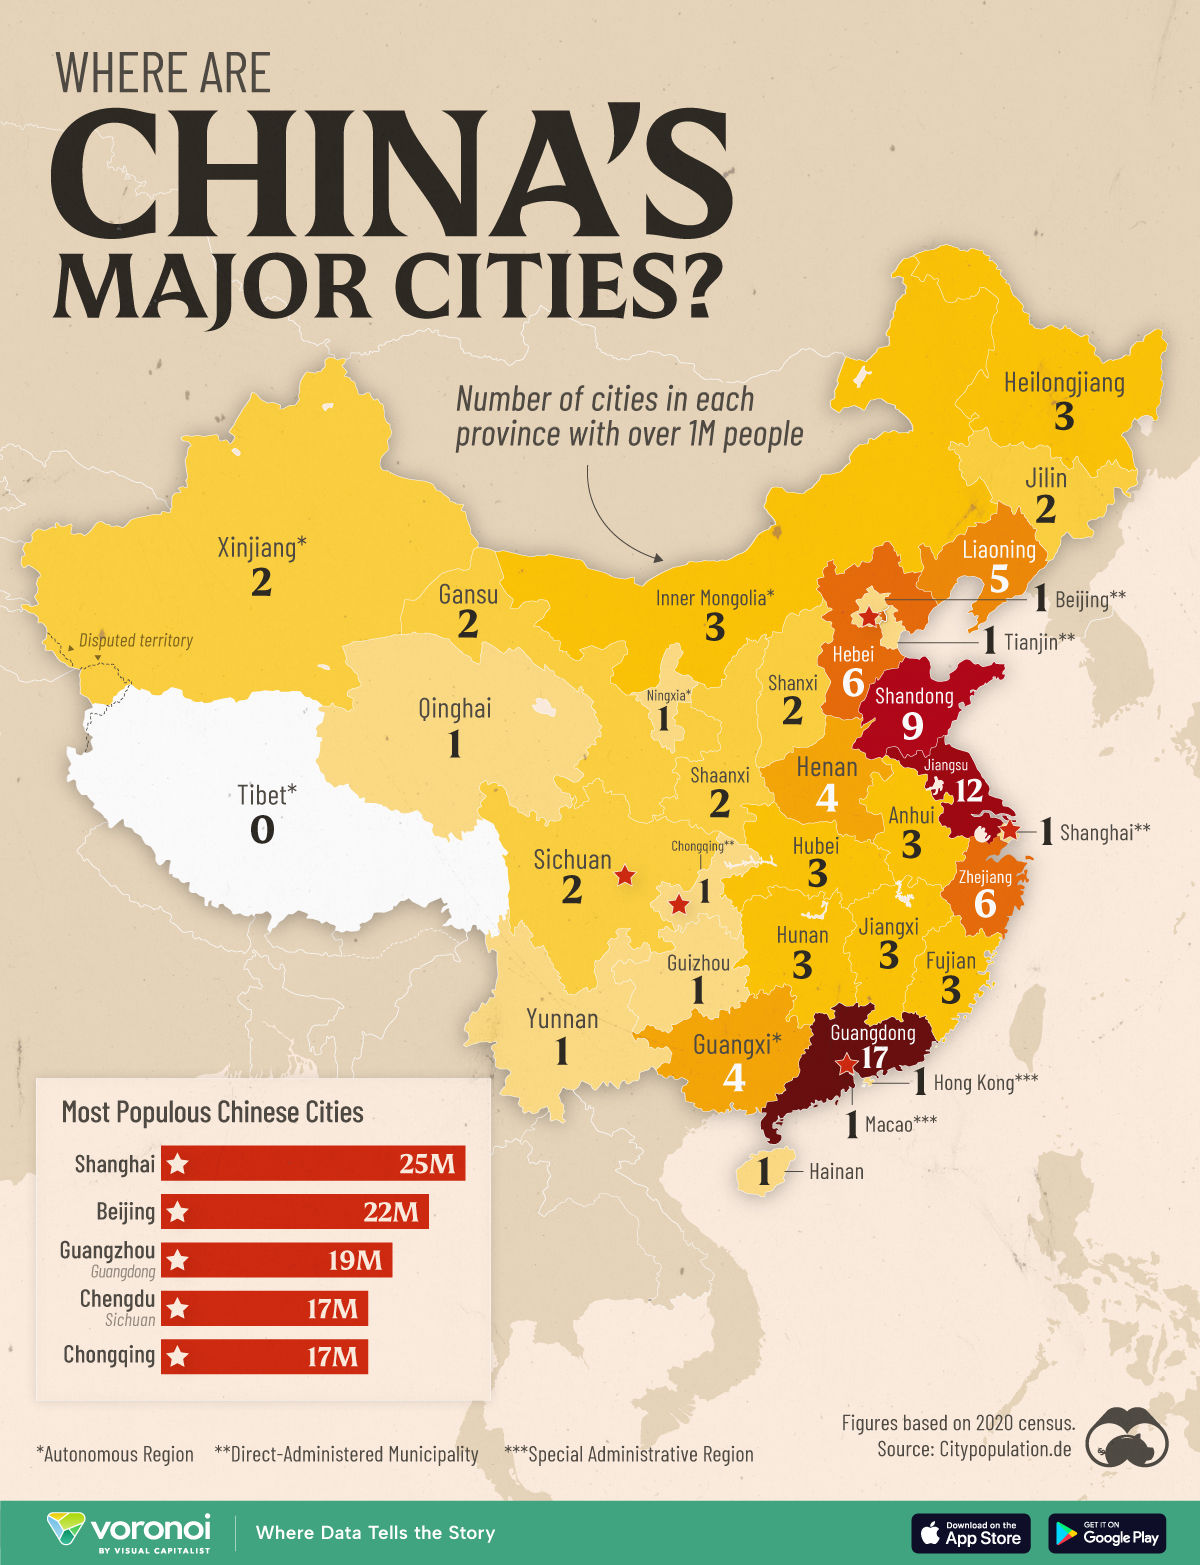 A map of all the Chinese provinces with cities over 1 million people.